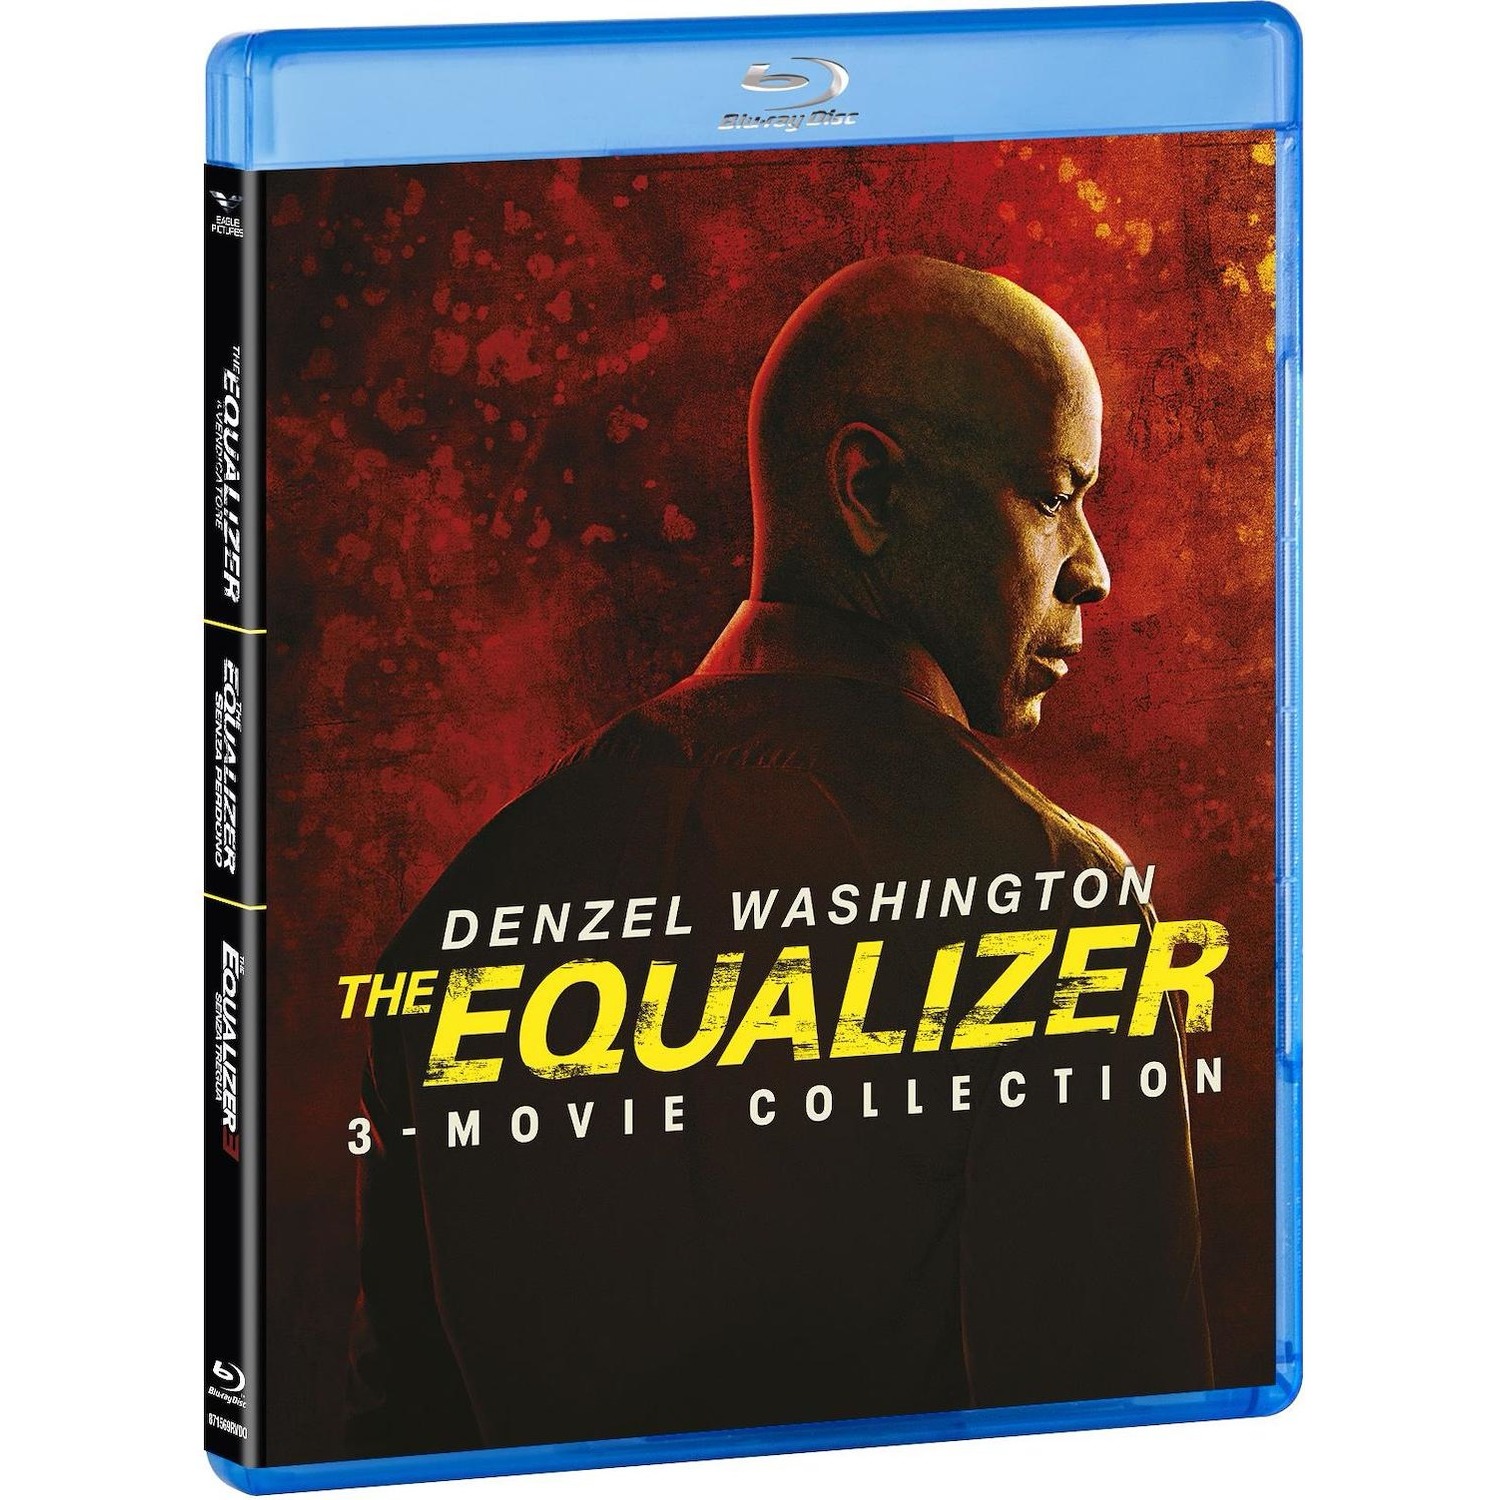 Image of Cofanetto Bluray The Equalizer 1-3 Movie Collection